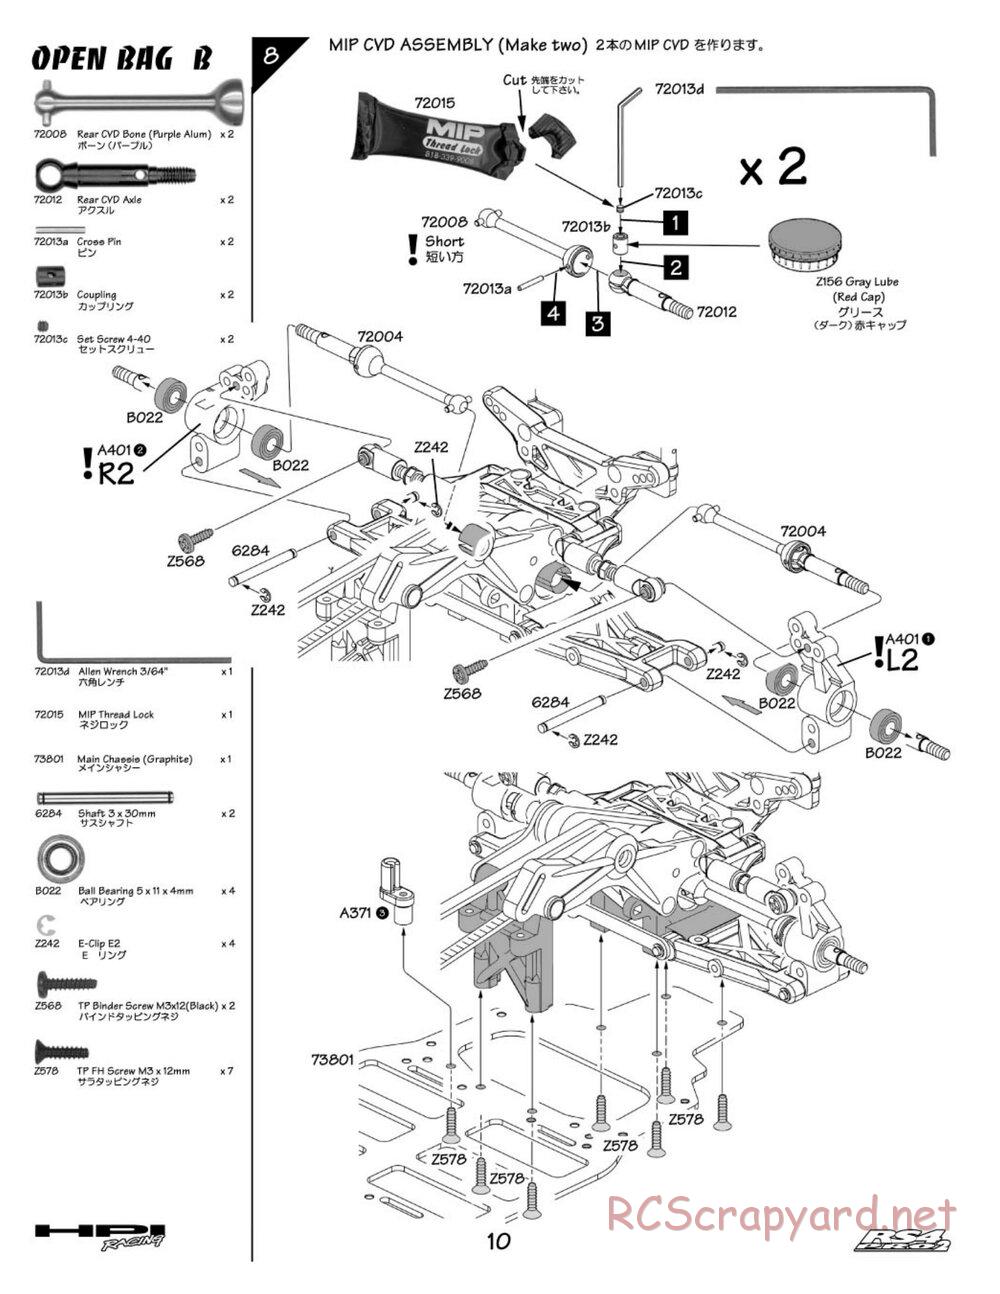 HPI - RS4 Pro 2 - Manual - Page 10